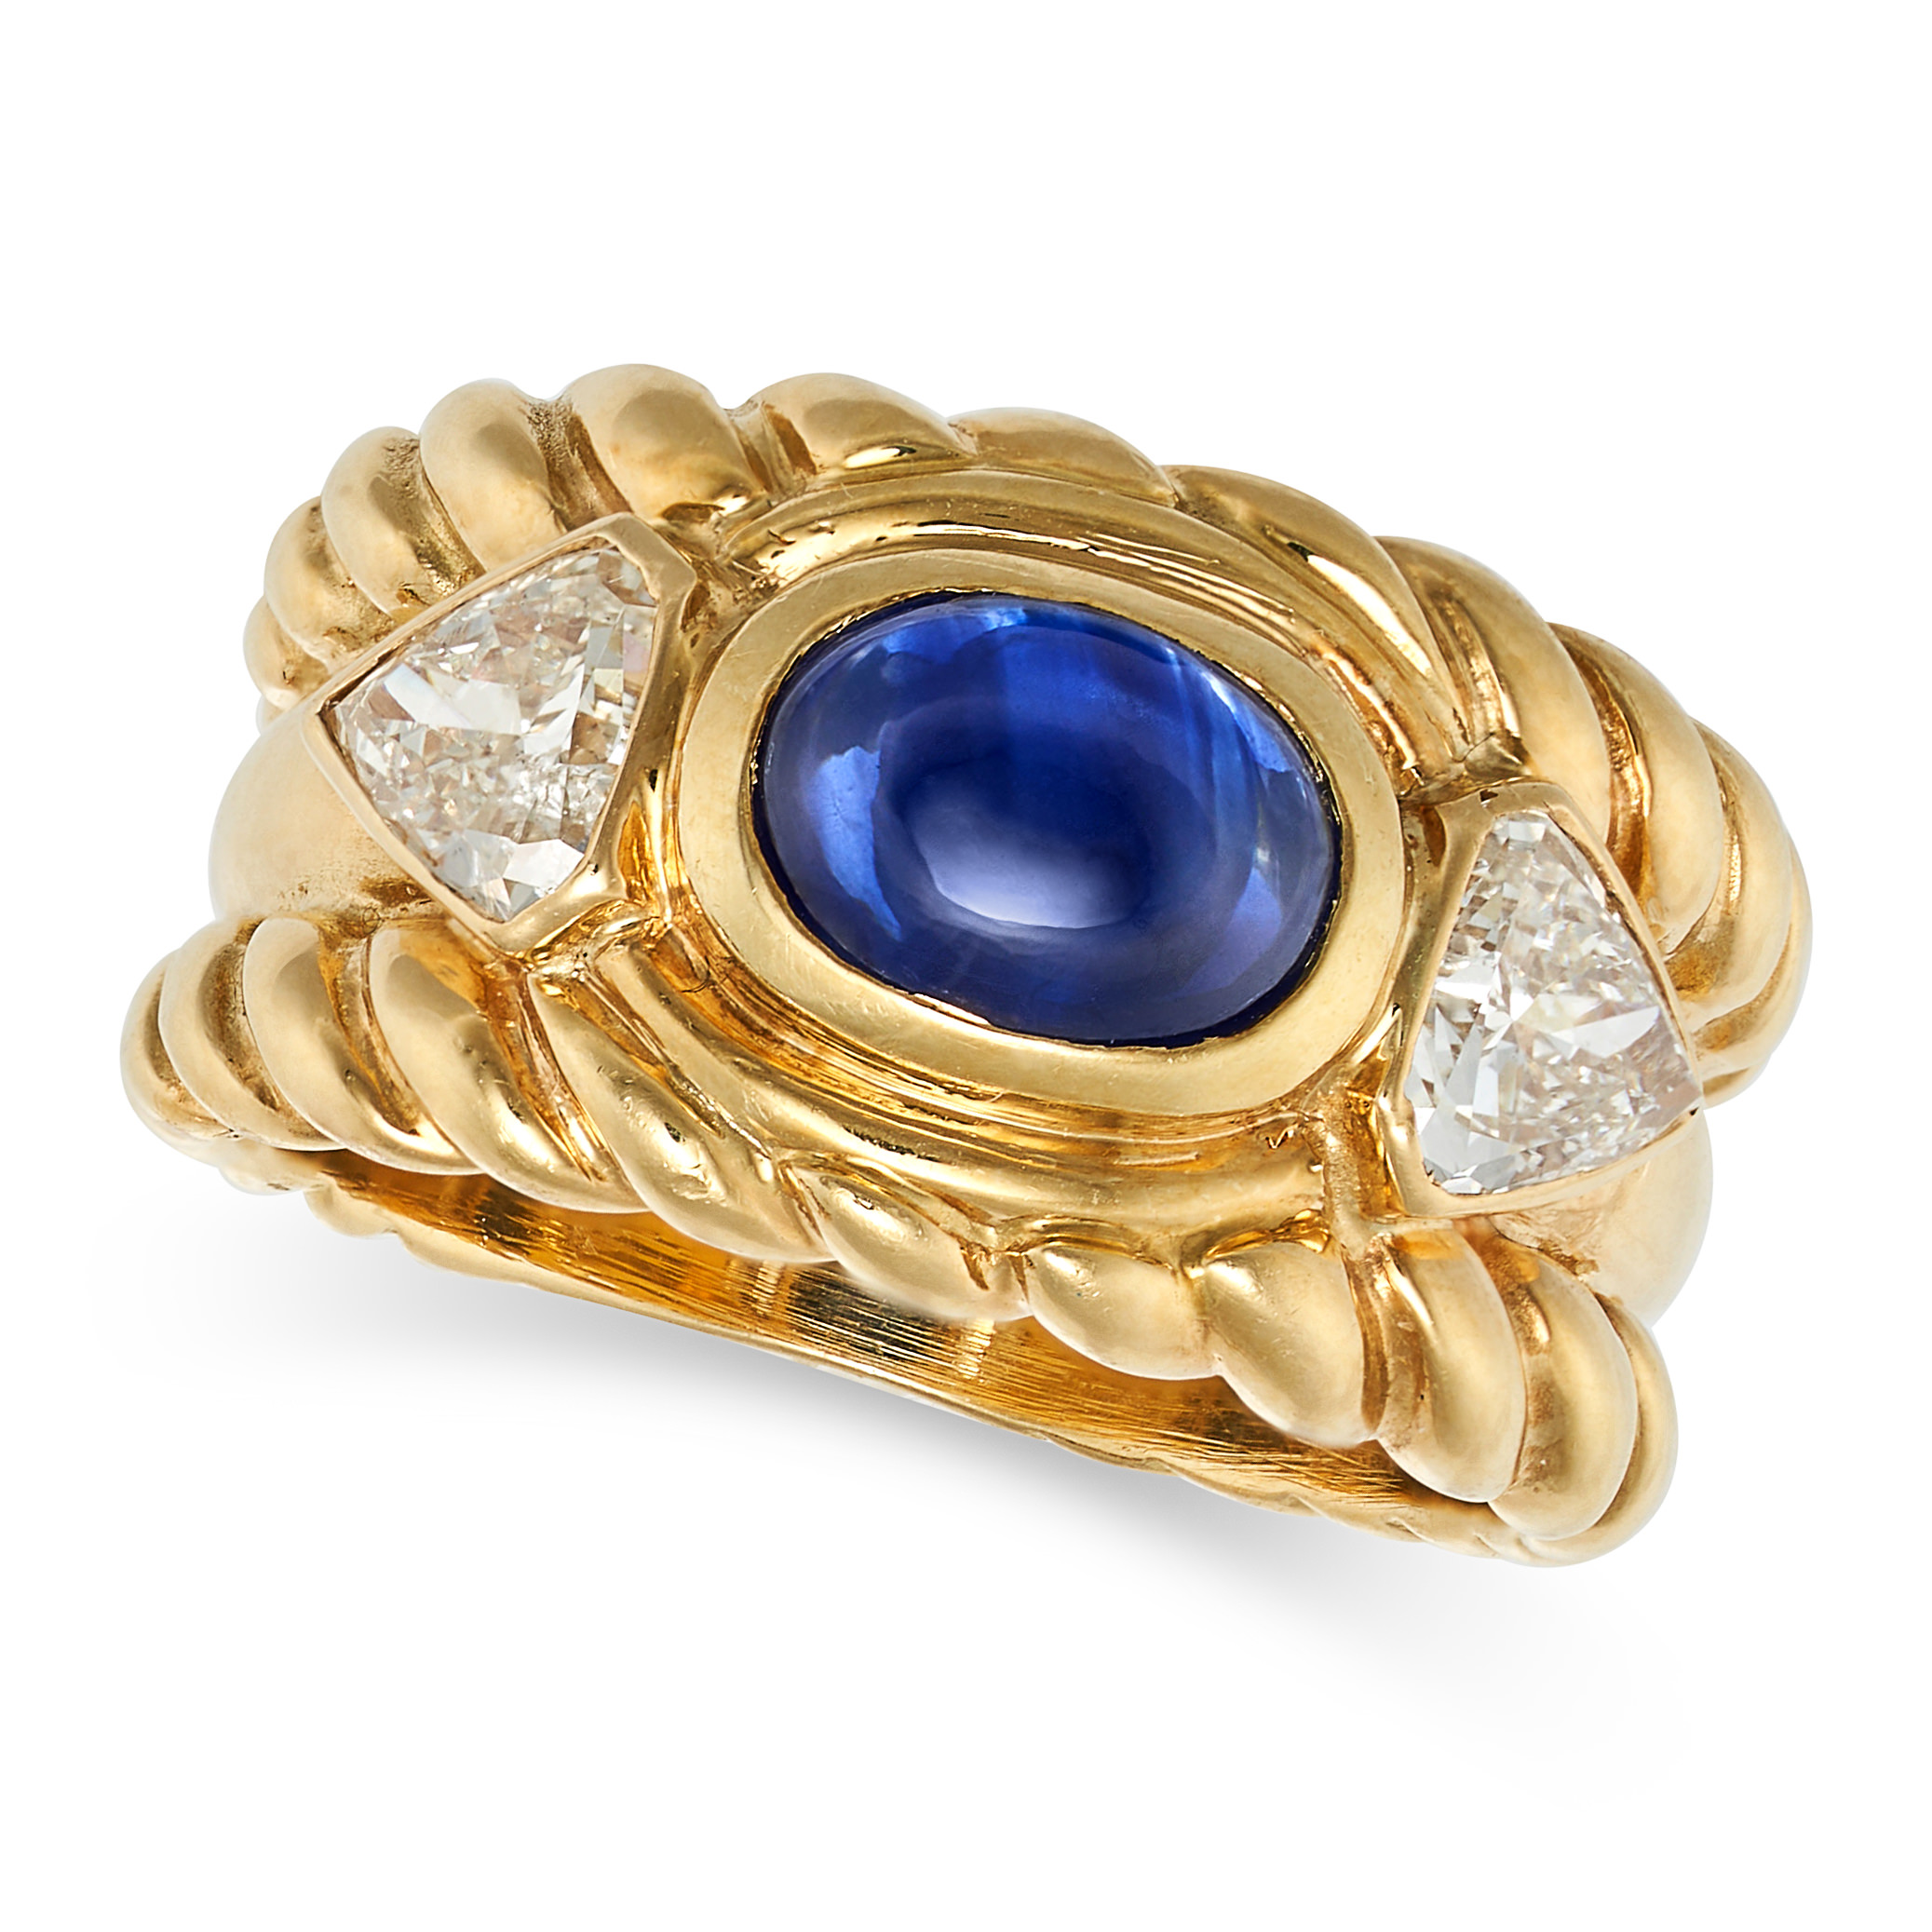 A SAPPHIRE AND DIAMOND DRESS RING in 18ct yellow gold, set with a cabochon sapphire of approximat...